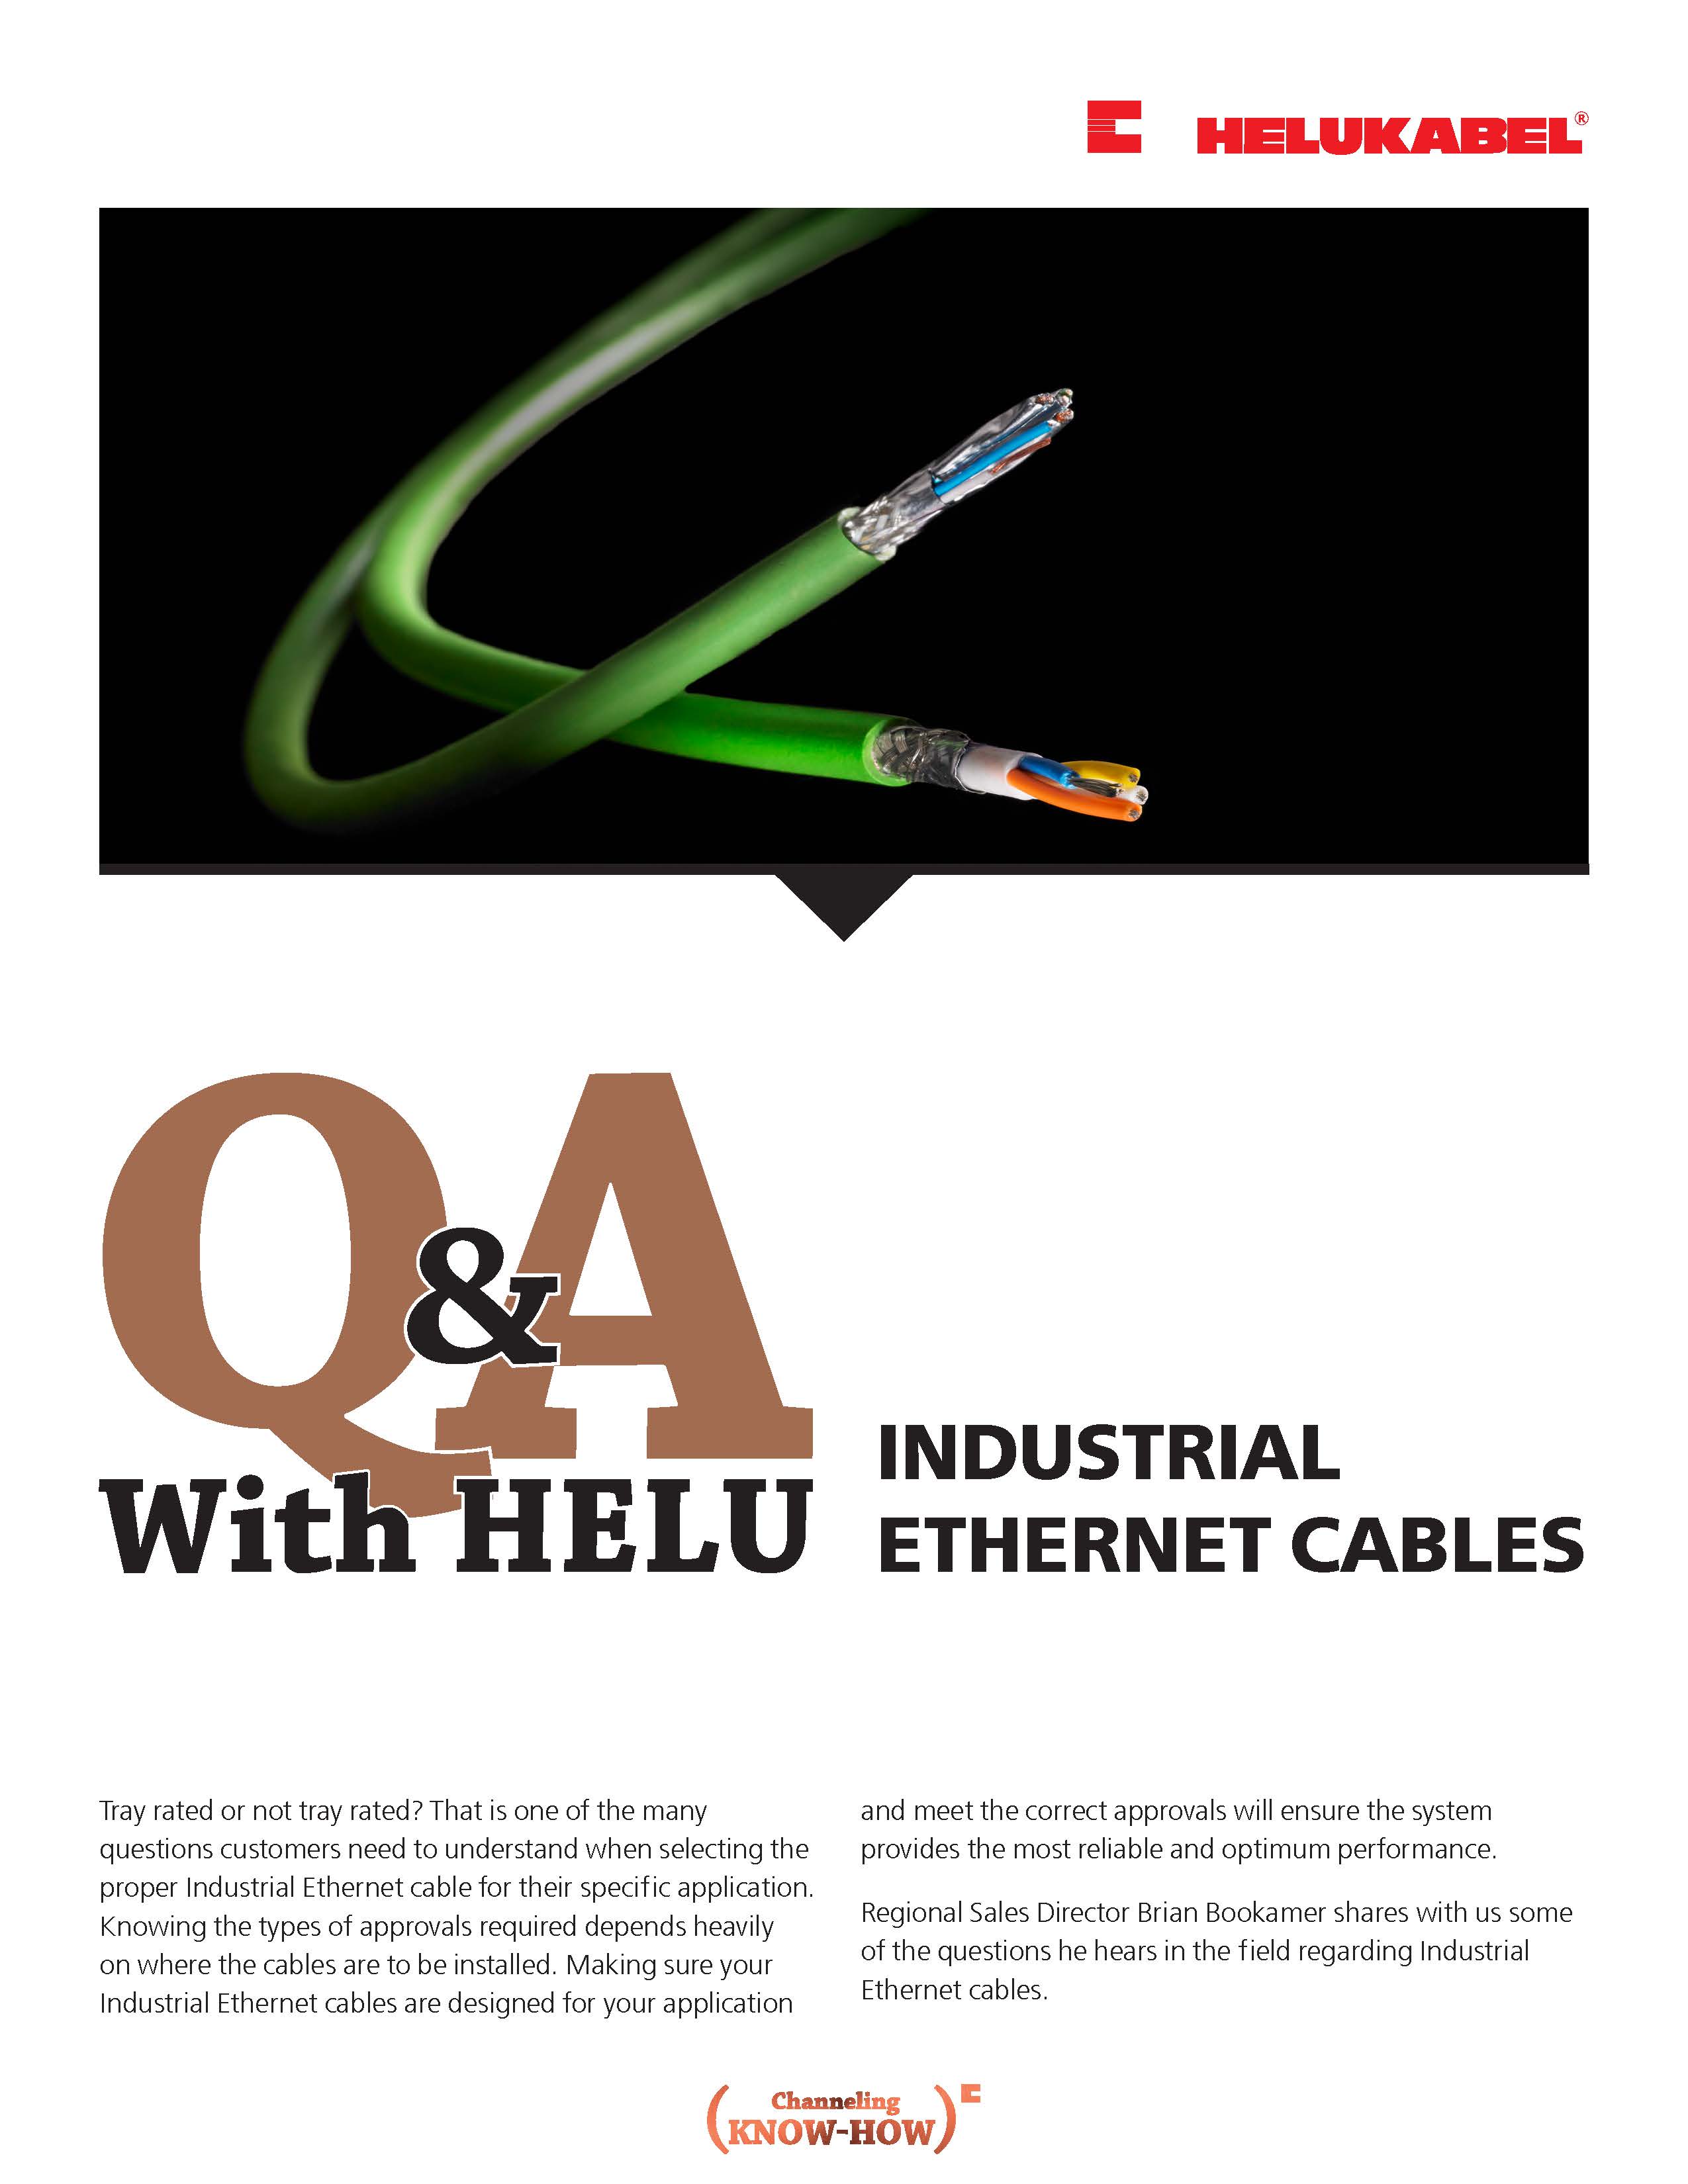 Q&A With HELU: Industrial Ethernet Cables